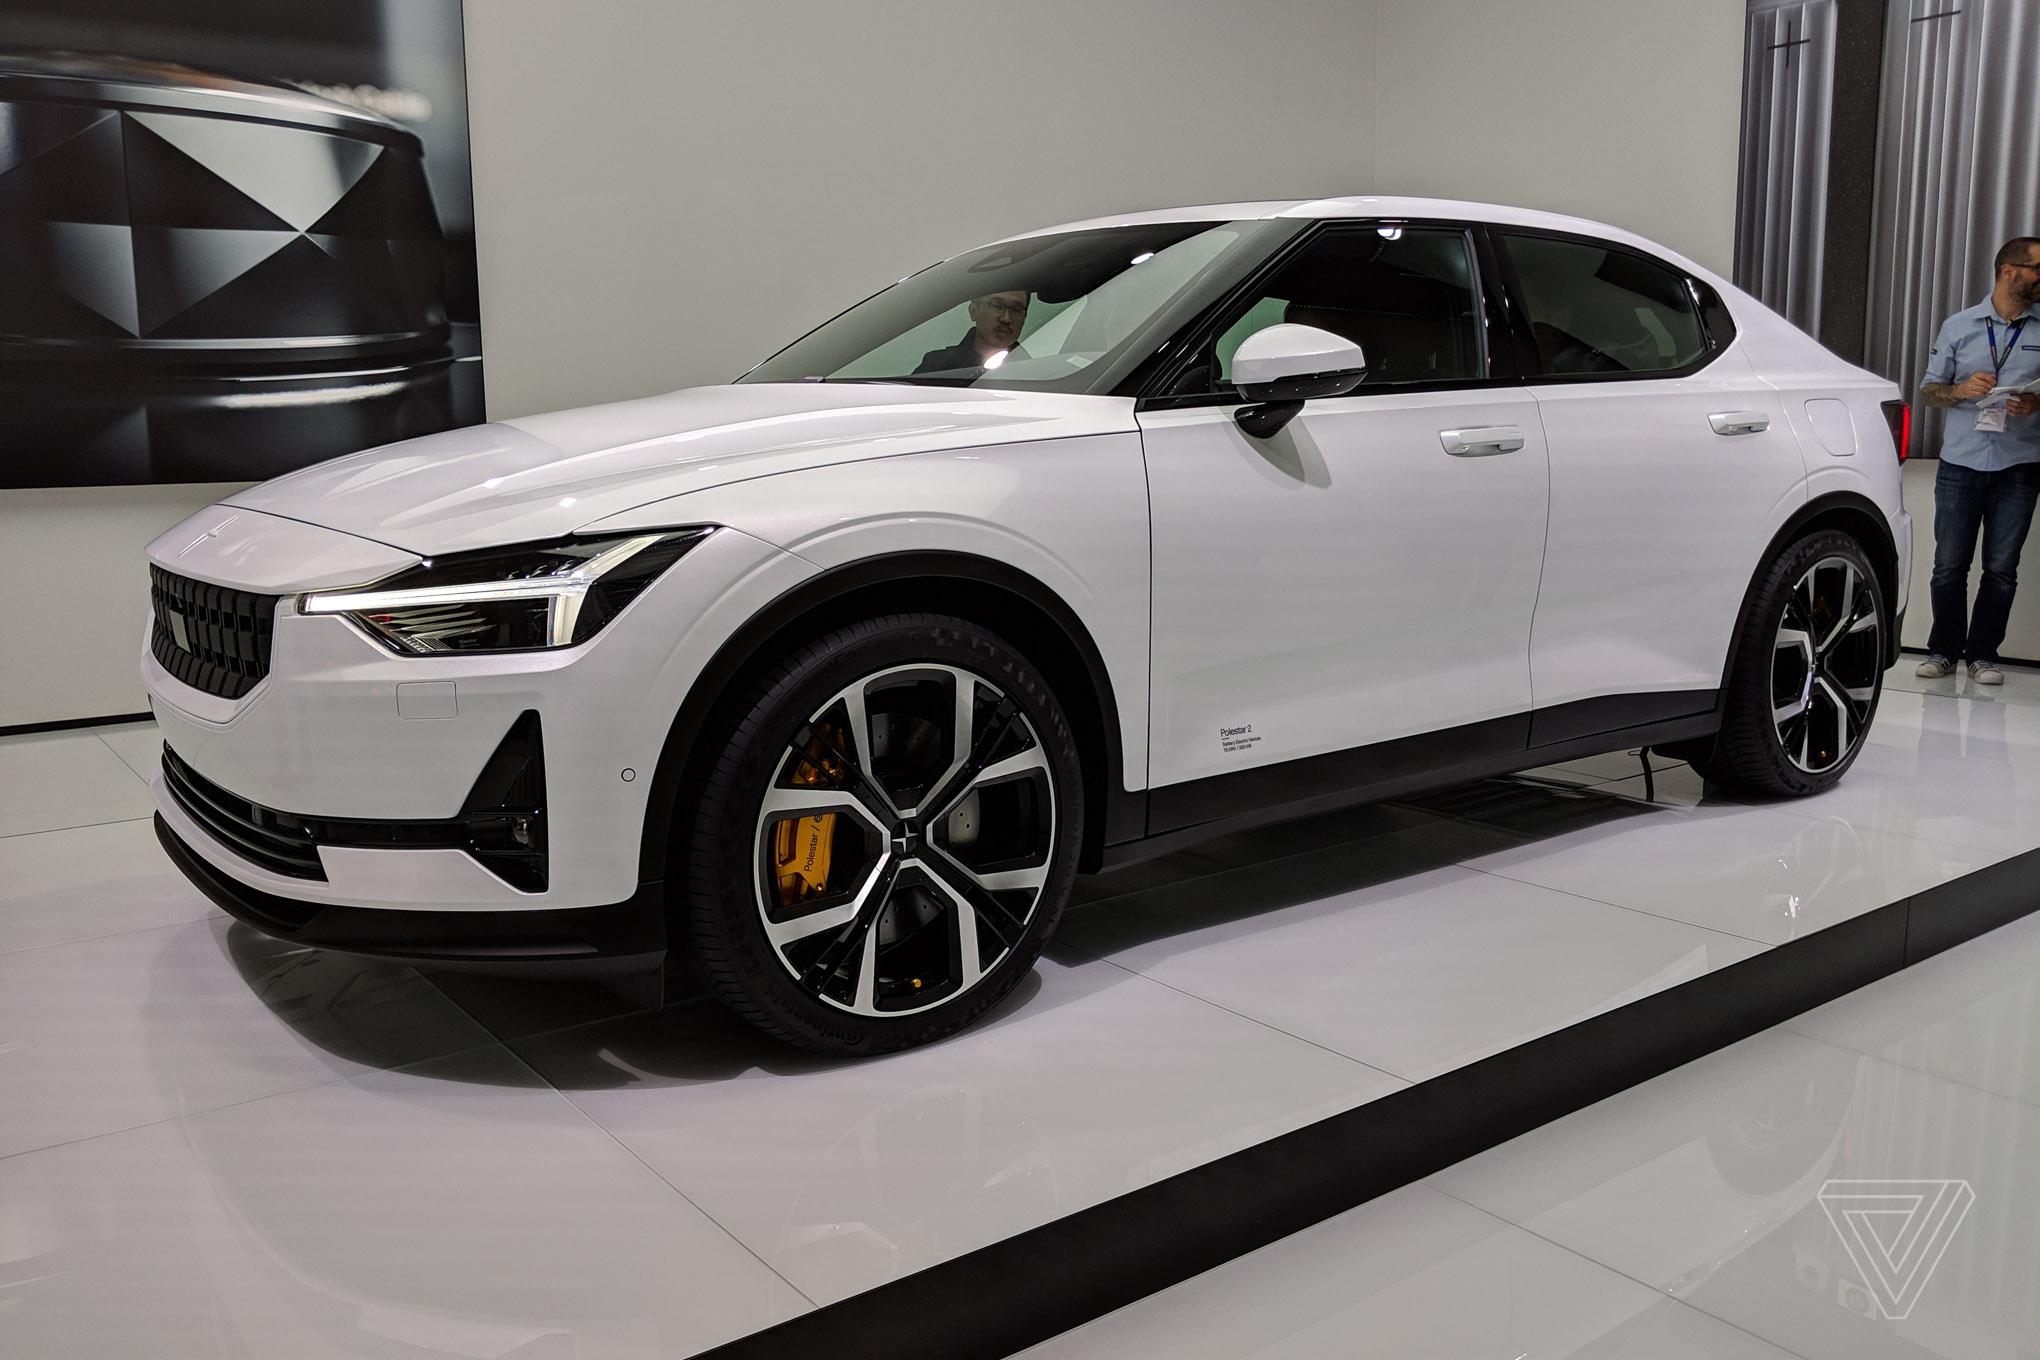 The Polestar 2's secret weapon against Tesla's Model 3 is Android